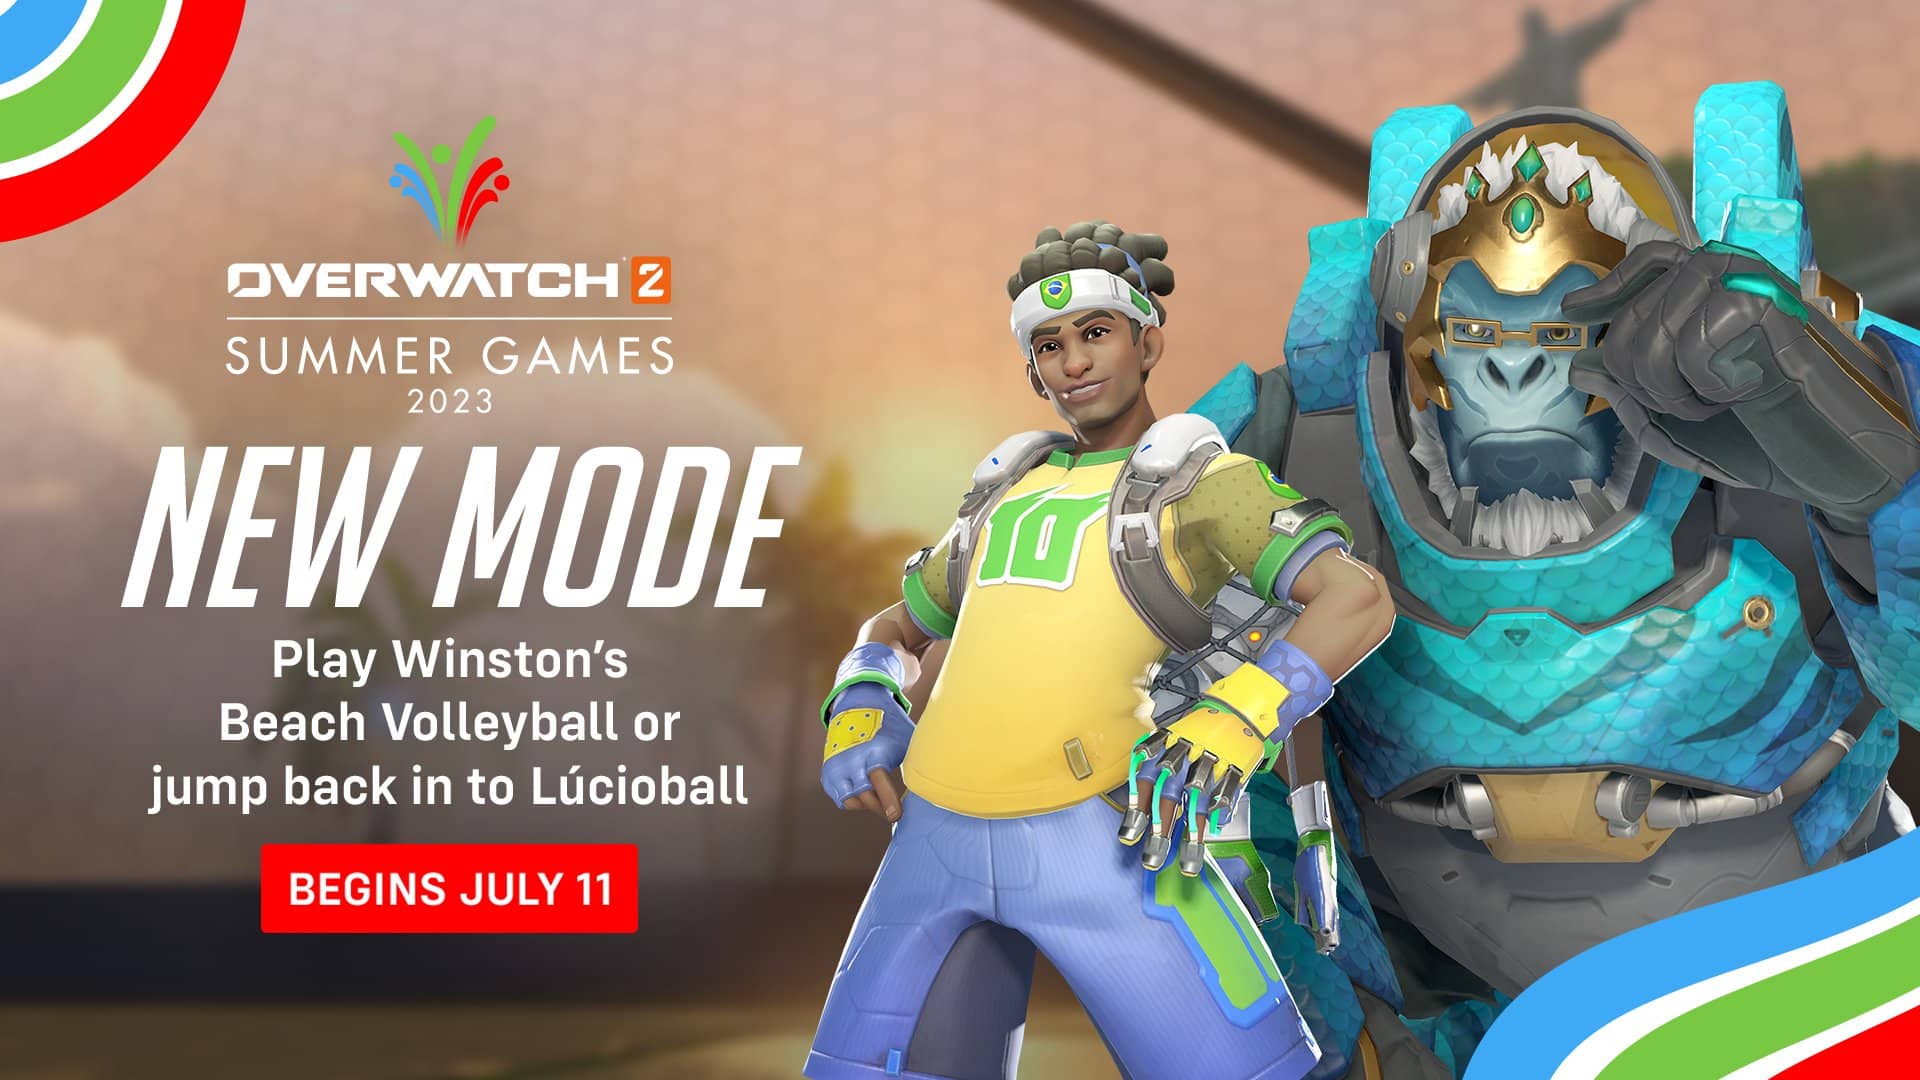 Overwatch 2 Update 3.56 for July 11 Fires Out for Summer Games 2023